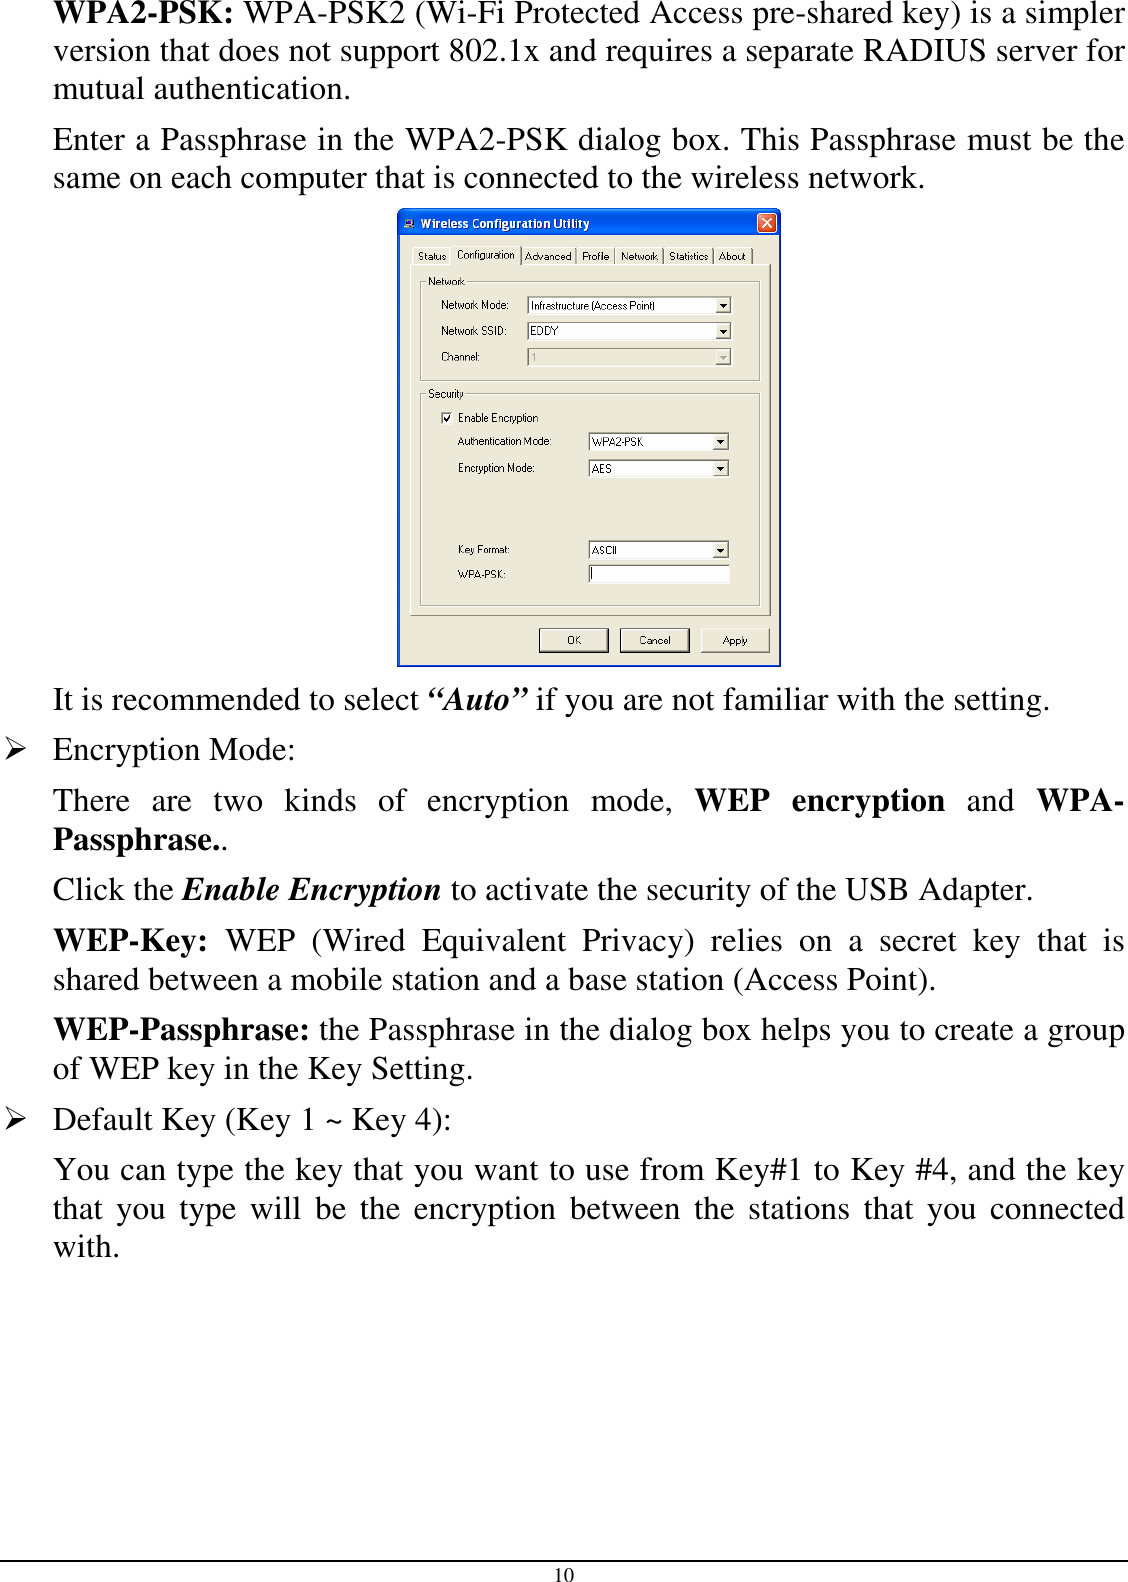 10 WPA2-PSK: WPA-PSK2 (Wi-Fi Protected Access pre-shared key) is a simpler version that does not support 802.1x and requires a separate RADIUS server for mutual authentication. Enter a Passphrase in the WPA2-PSK dialog box. This Passphrase must be the same on each computer that is connected to the wireless network.  It is recommended to select “Auto” if you are not familiar with the setting.  Encryption Mode:  There  are  two  kinds  of  encryption  mode,  WEP  encryption  and  WPA-Passphrase.. Click the Enable Encryption to activate the security of the USB Adapter. WEP-Key:  WEP  (Wired  Equivalent  Privacy)  relies  on  a  secret  key  that  is shared between a mobile station and a base station (Access Point). WEP-Passphrase: the Passphrase in the dialog box helps you to create a group of WEP key in the Key Setting.  Default Key (Key 1 ~ Key 4):  You can type the key that you want to use from Key#1 to Key #4, and the key that  you type  will  be  the  encryption between  the stations  that  you  connected with.  